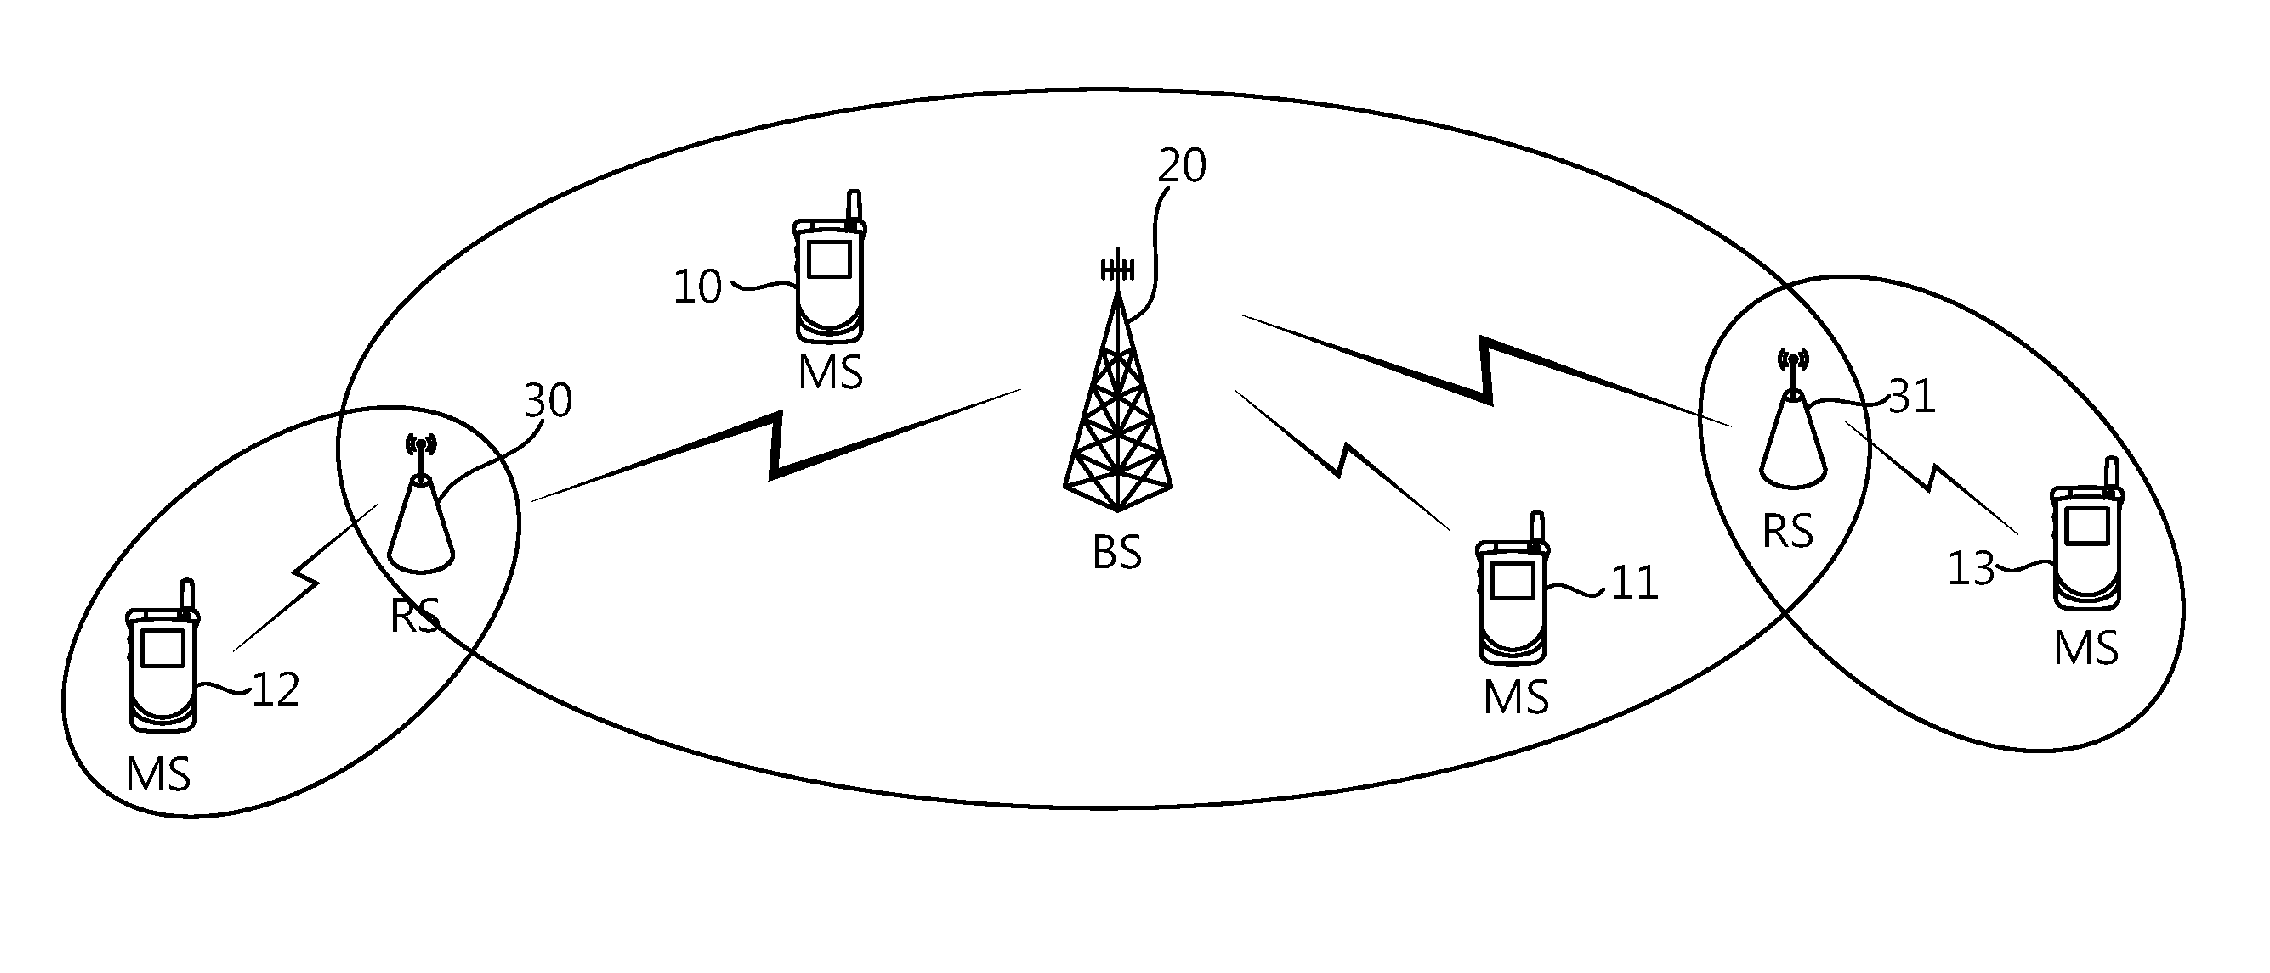 Resource allocation method for backhaul link and access link in a wireless communication system including relay